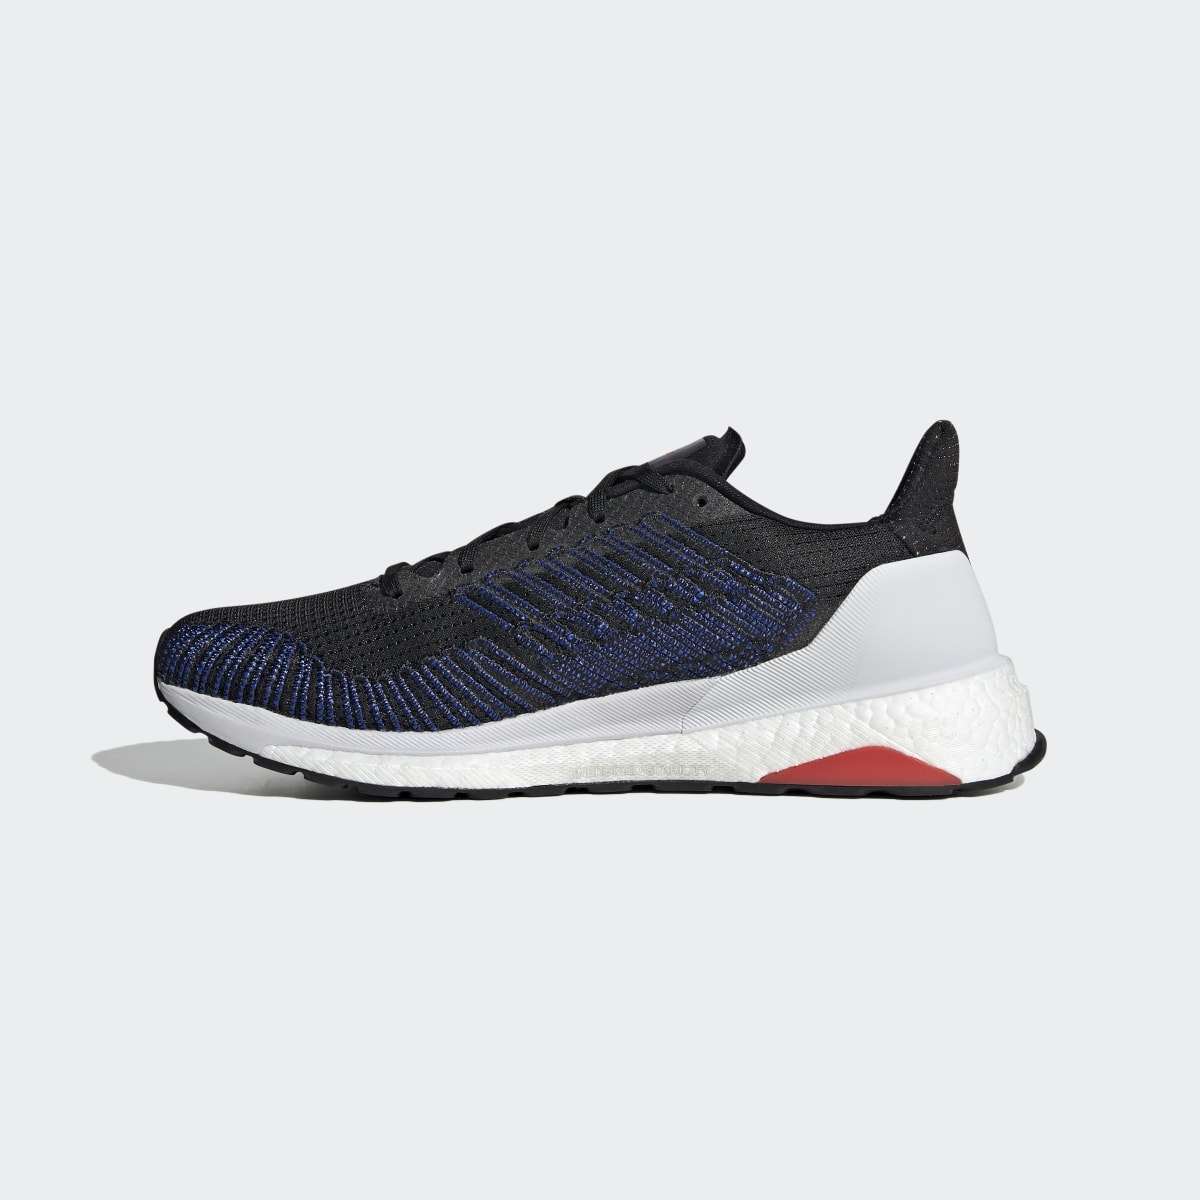 Adidas Solarboost ST 19 Shoes. 8